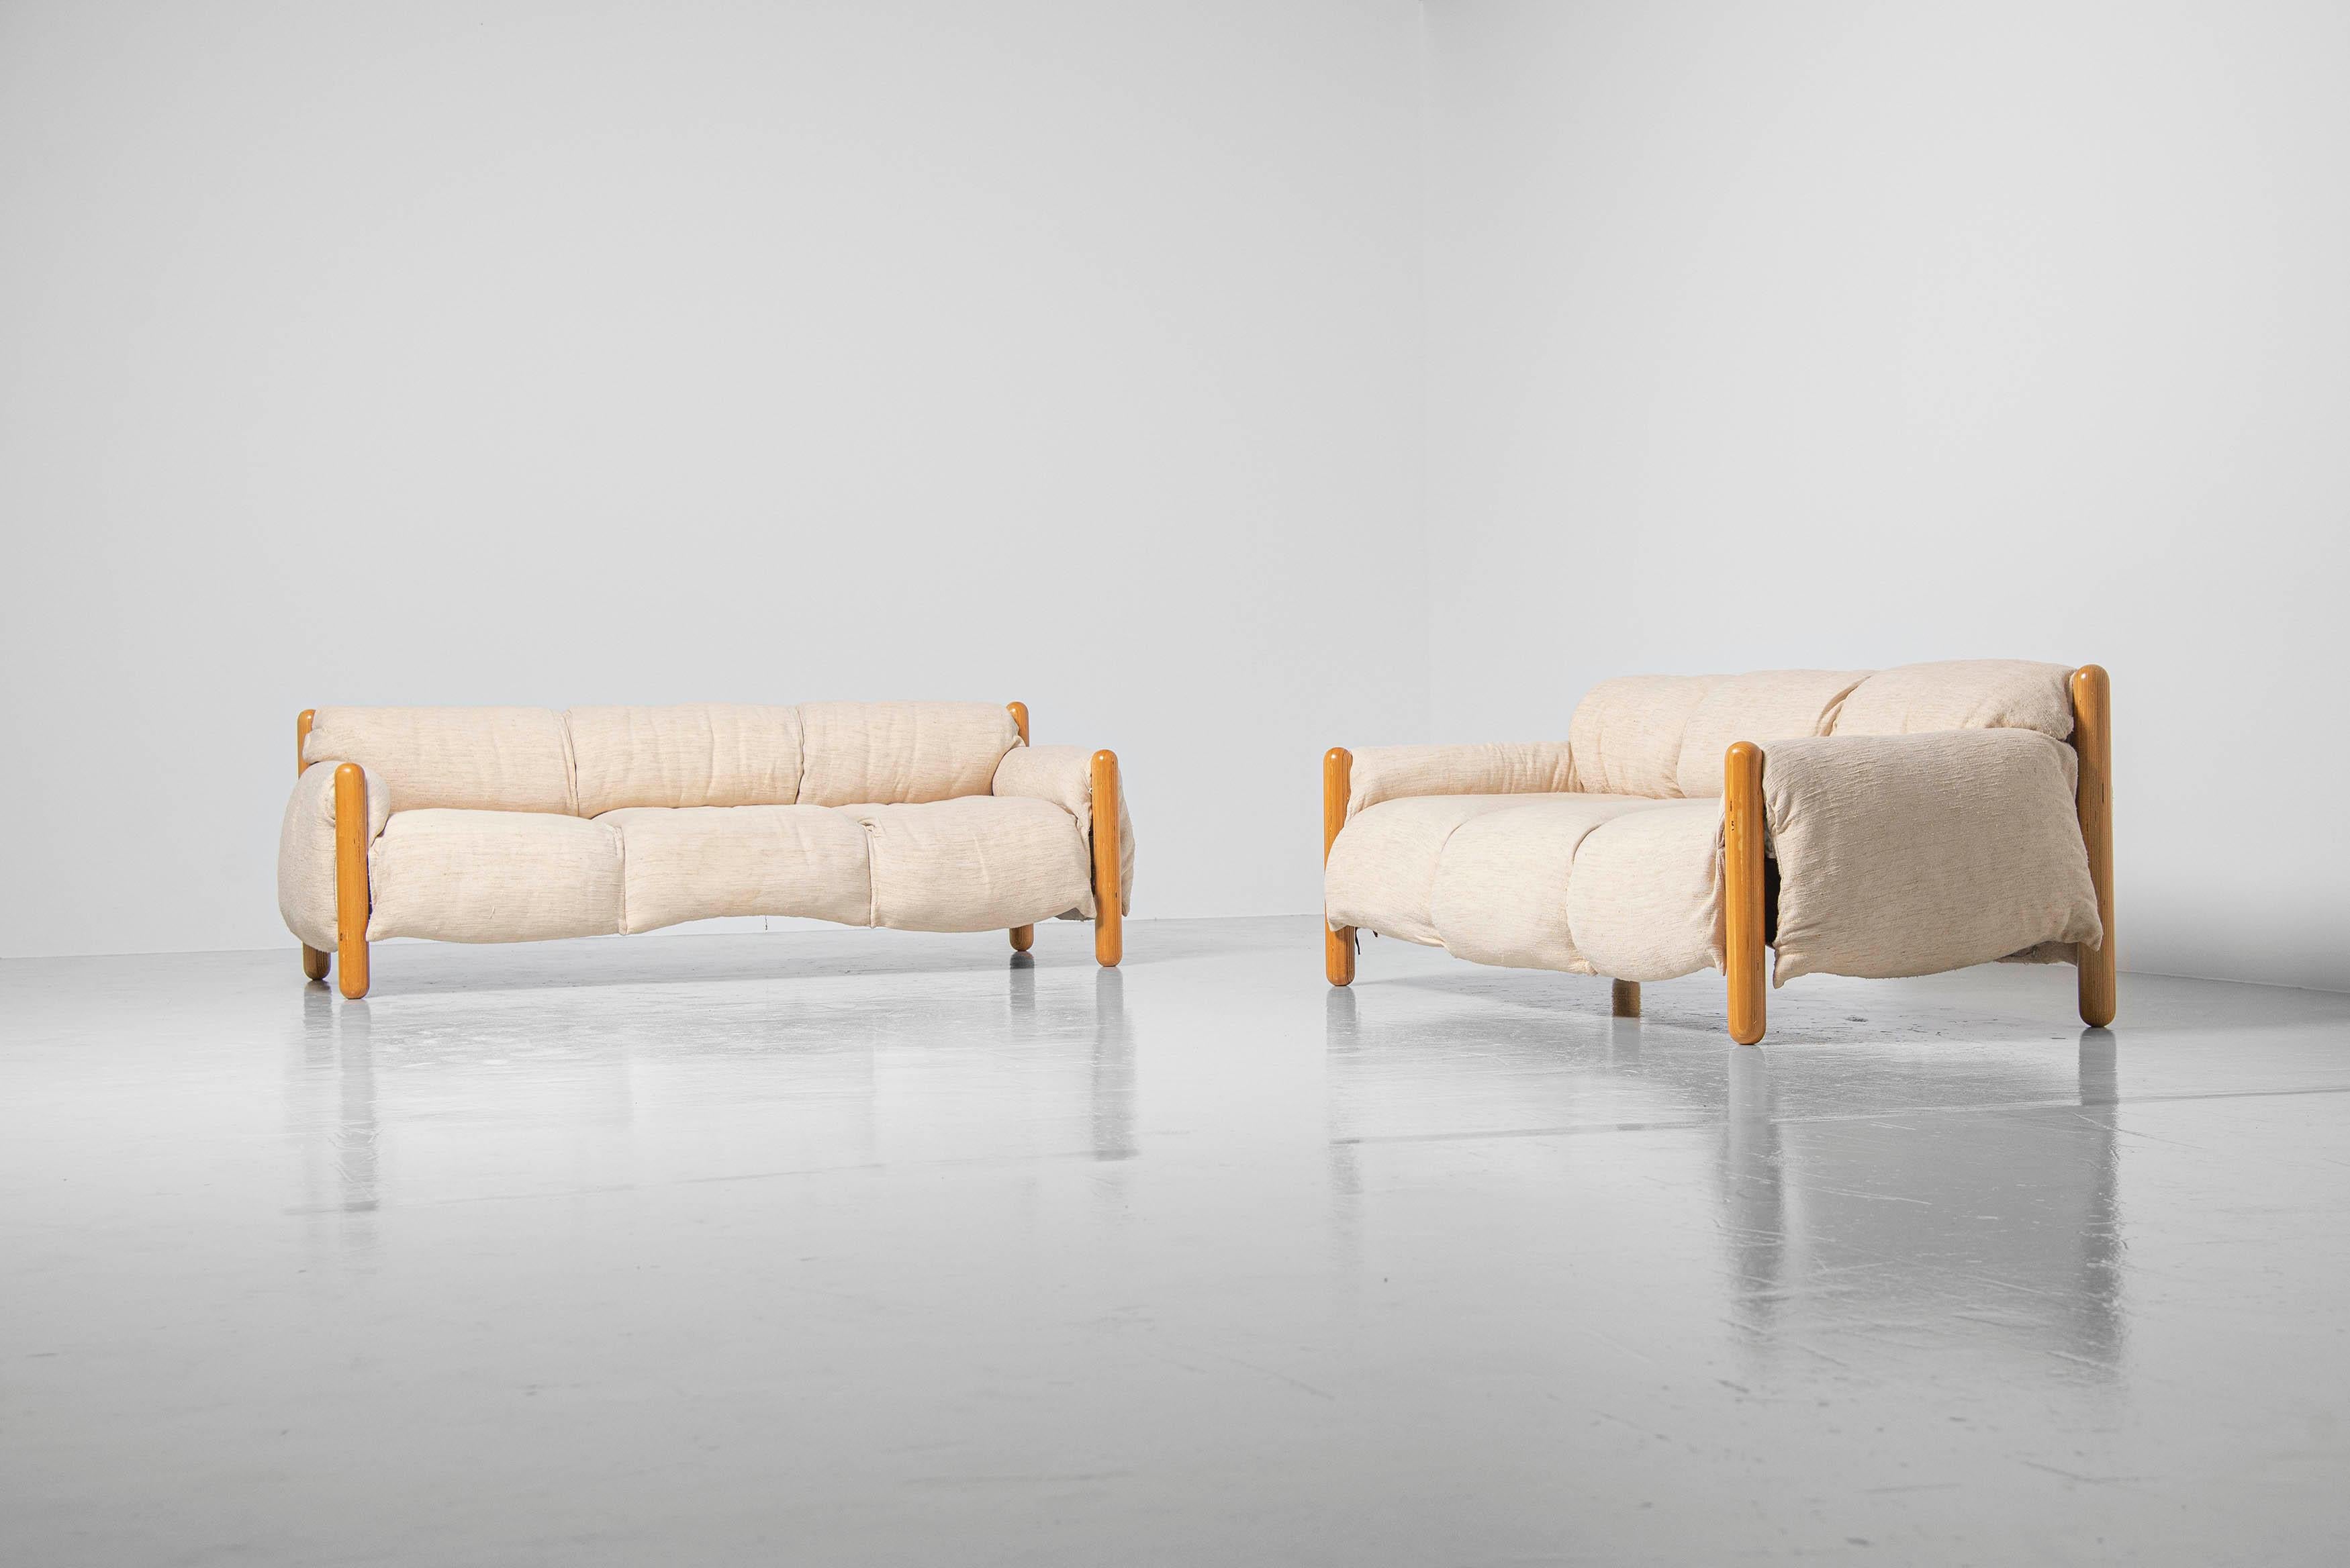 Playful and cosy Gambadilegno sofa's designed by Enzo Mari and manufactured by Driade, Italy 1974. These sofa's were made in very small production only and makes these very difficult to find. These sofa's were always together in a pair and have